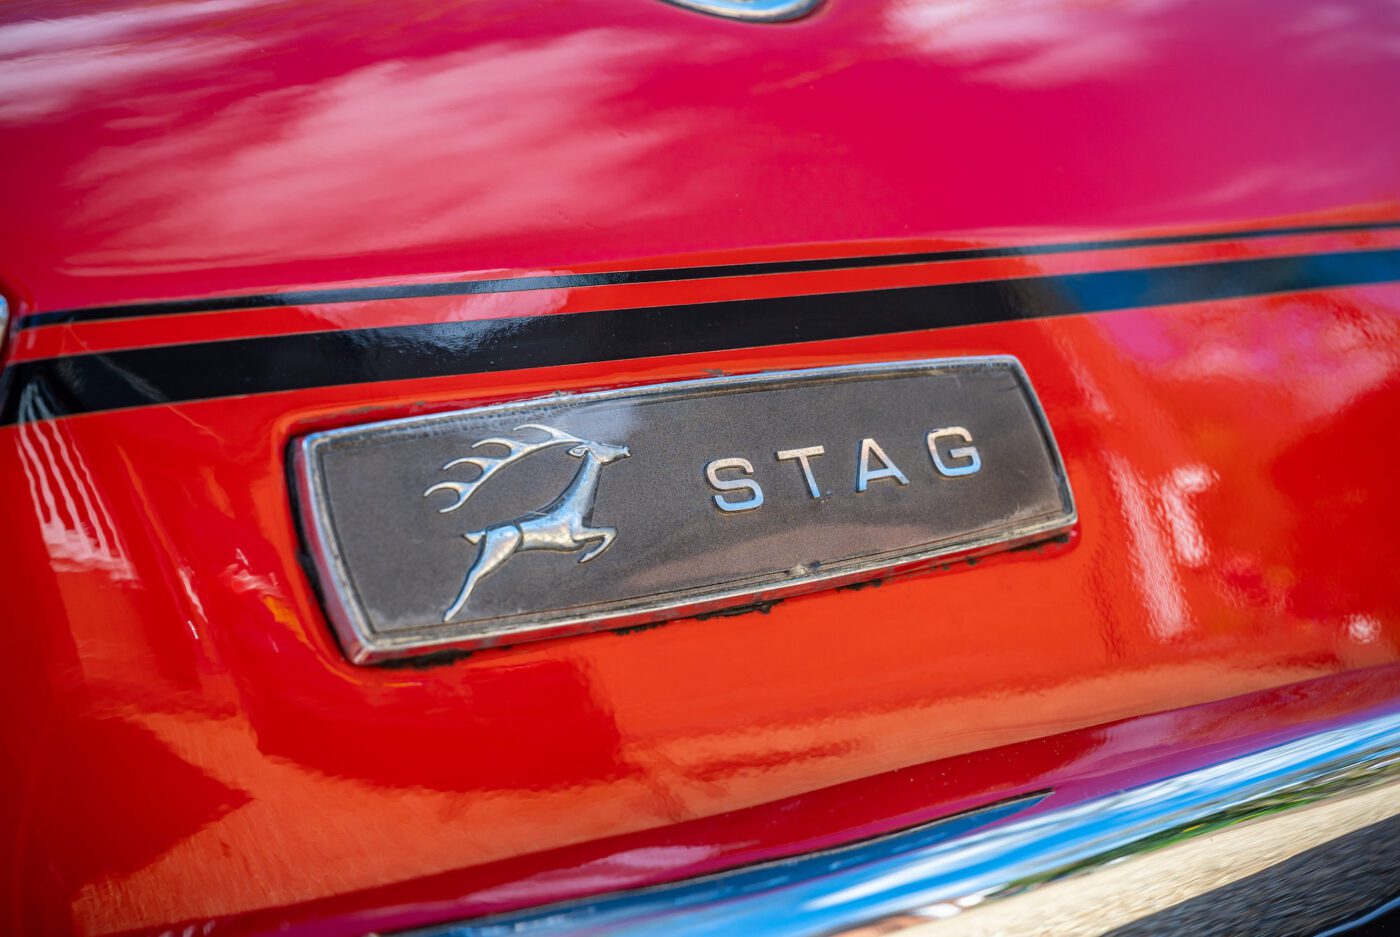 Stag badge